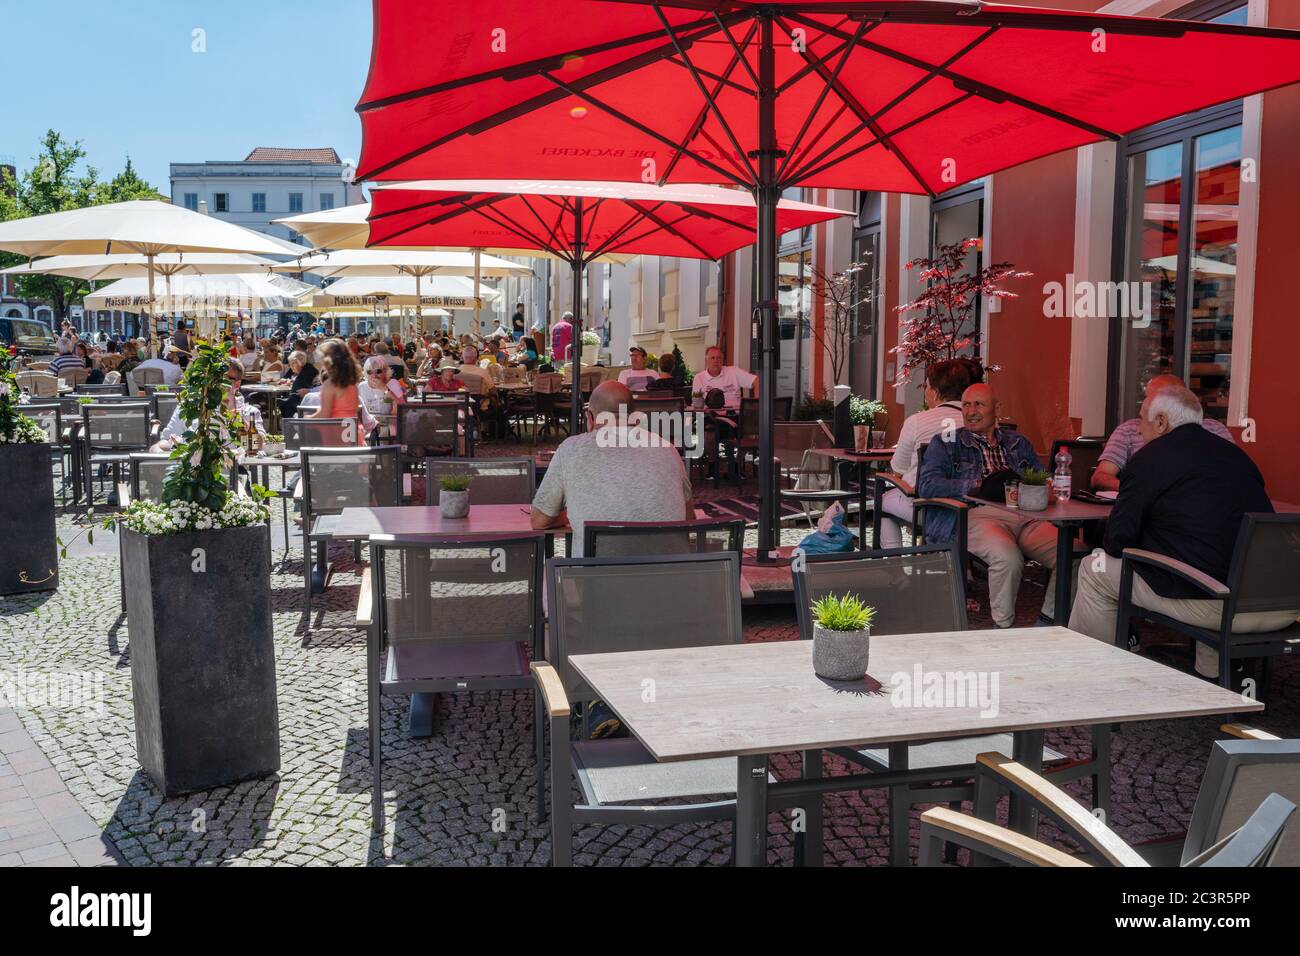 Wismar, Germany, June 15, 2020: People are enjoying the sunny summer day in a street cafe onthe market place after lock down during the coronavirus pa Stock Photo